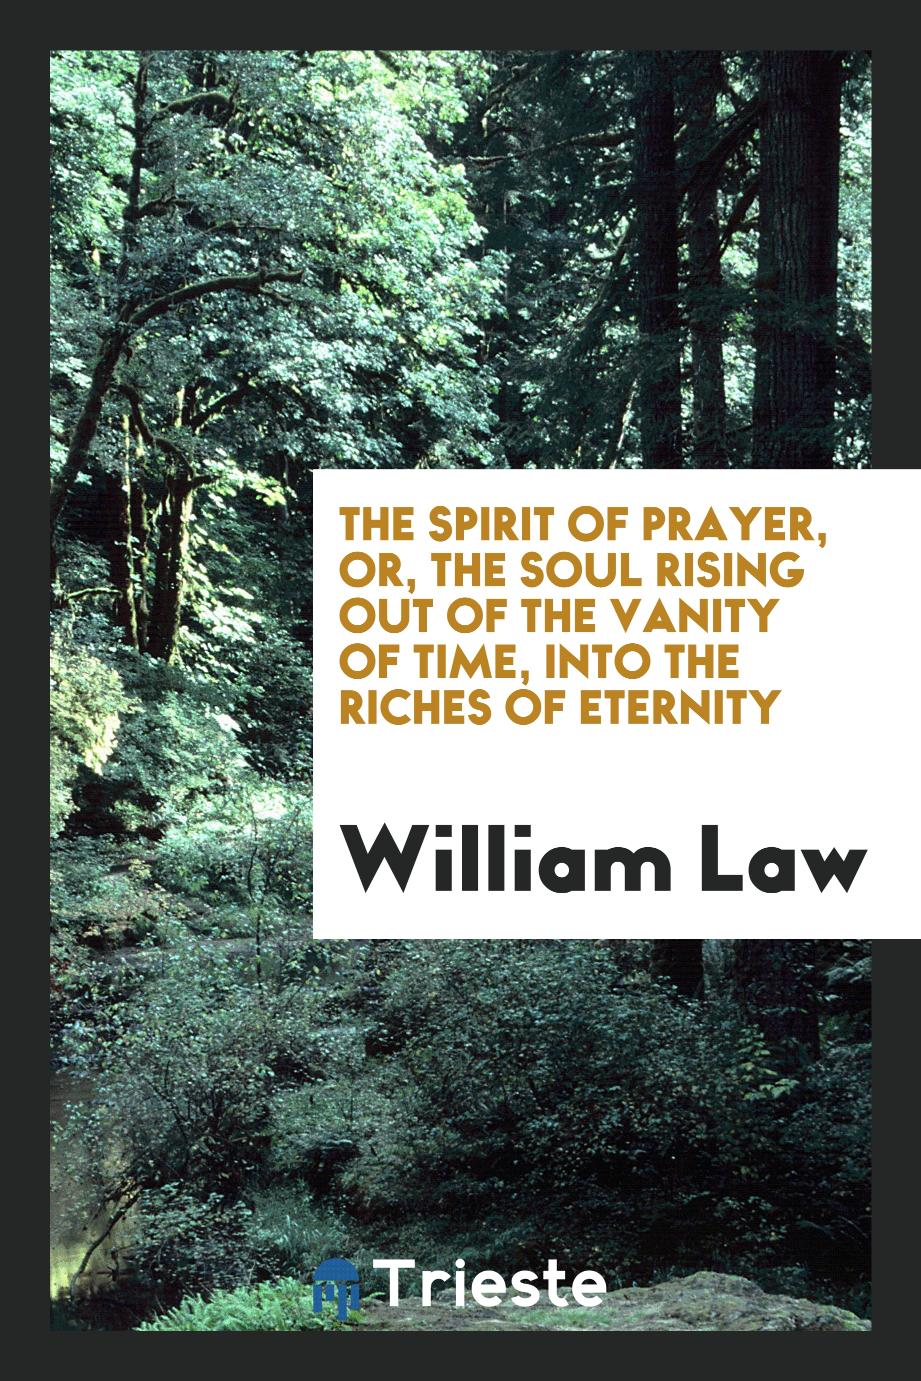 The Spirit of Prayer, Or, The Soul Rising Out of the Vanity of Time, Into the Riches of Eternity